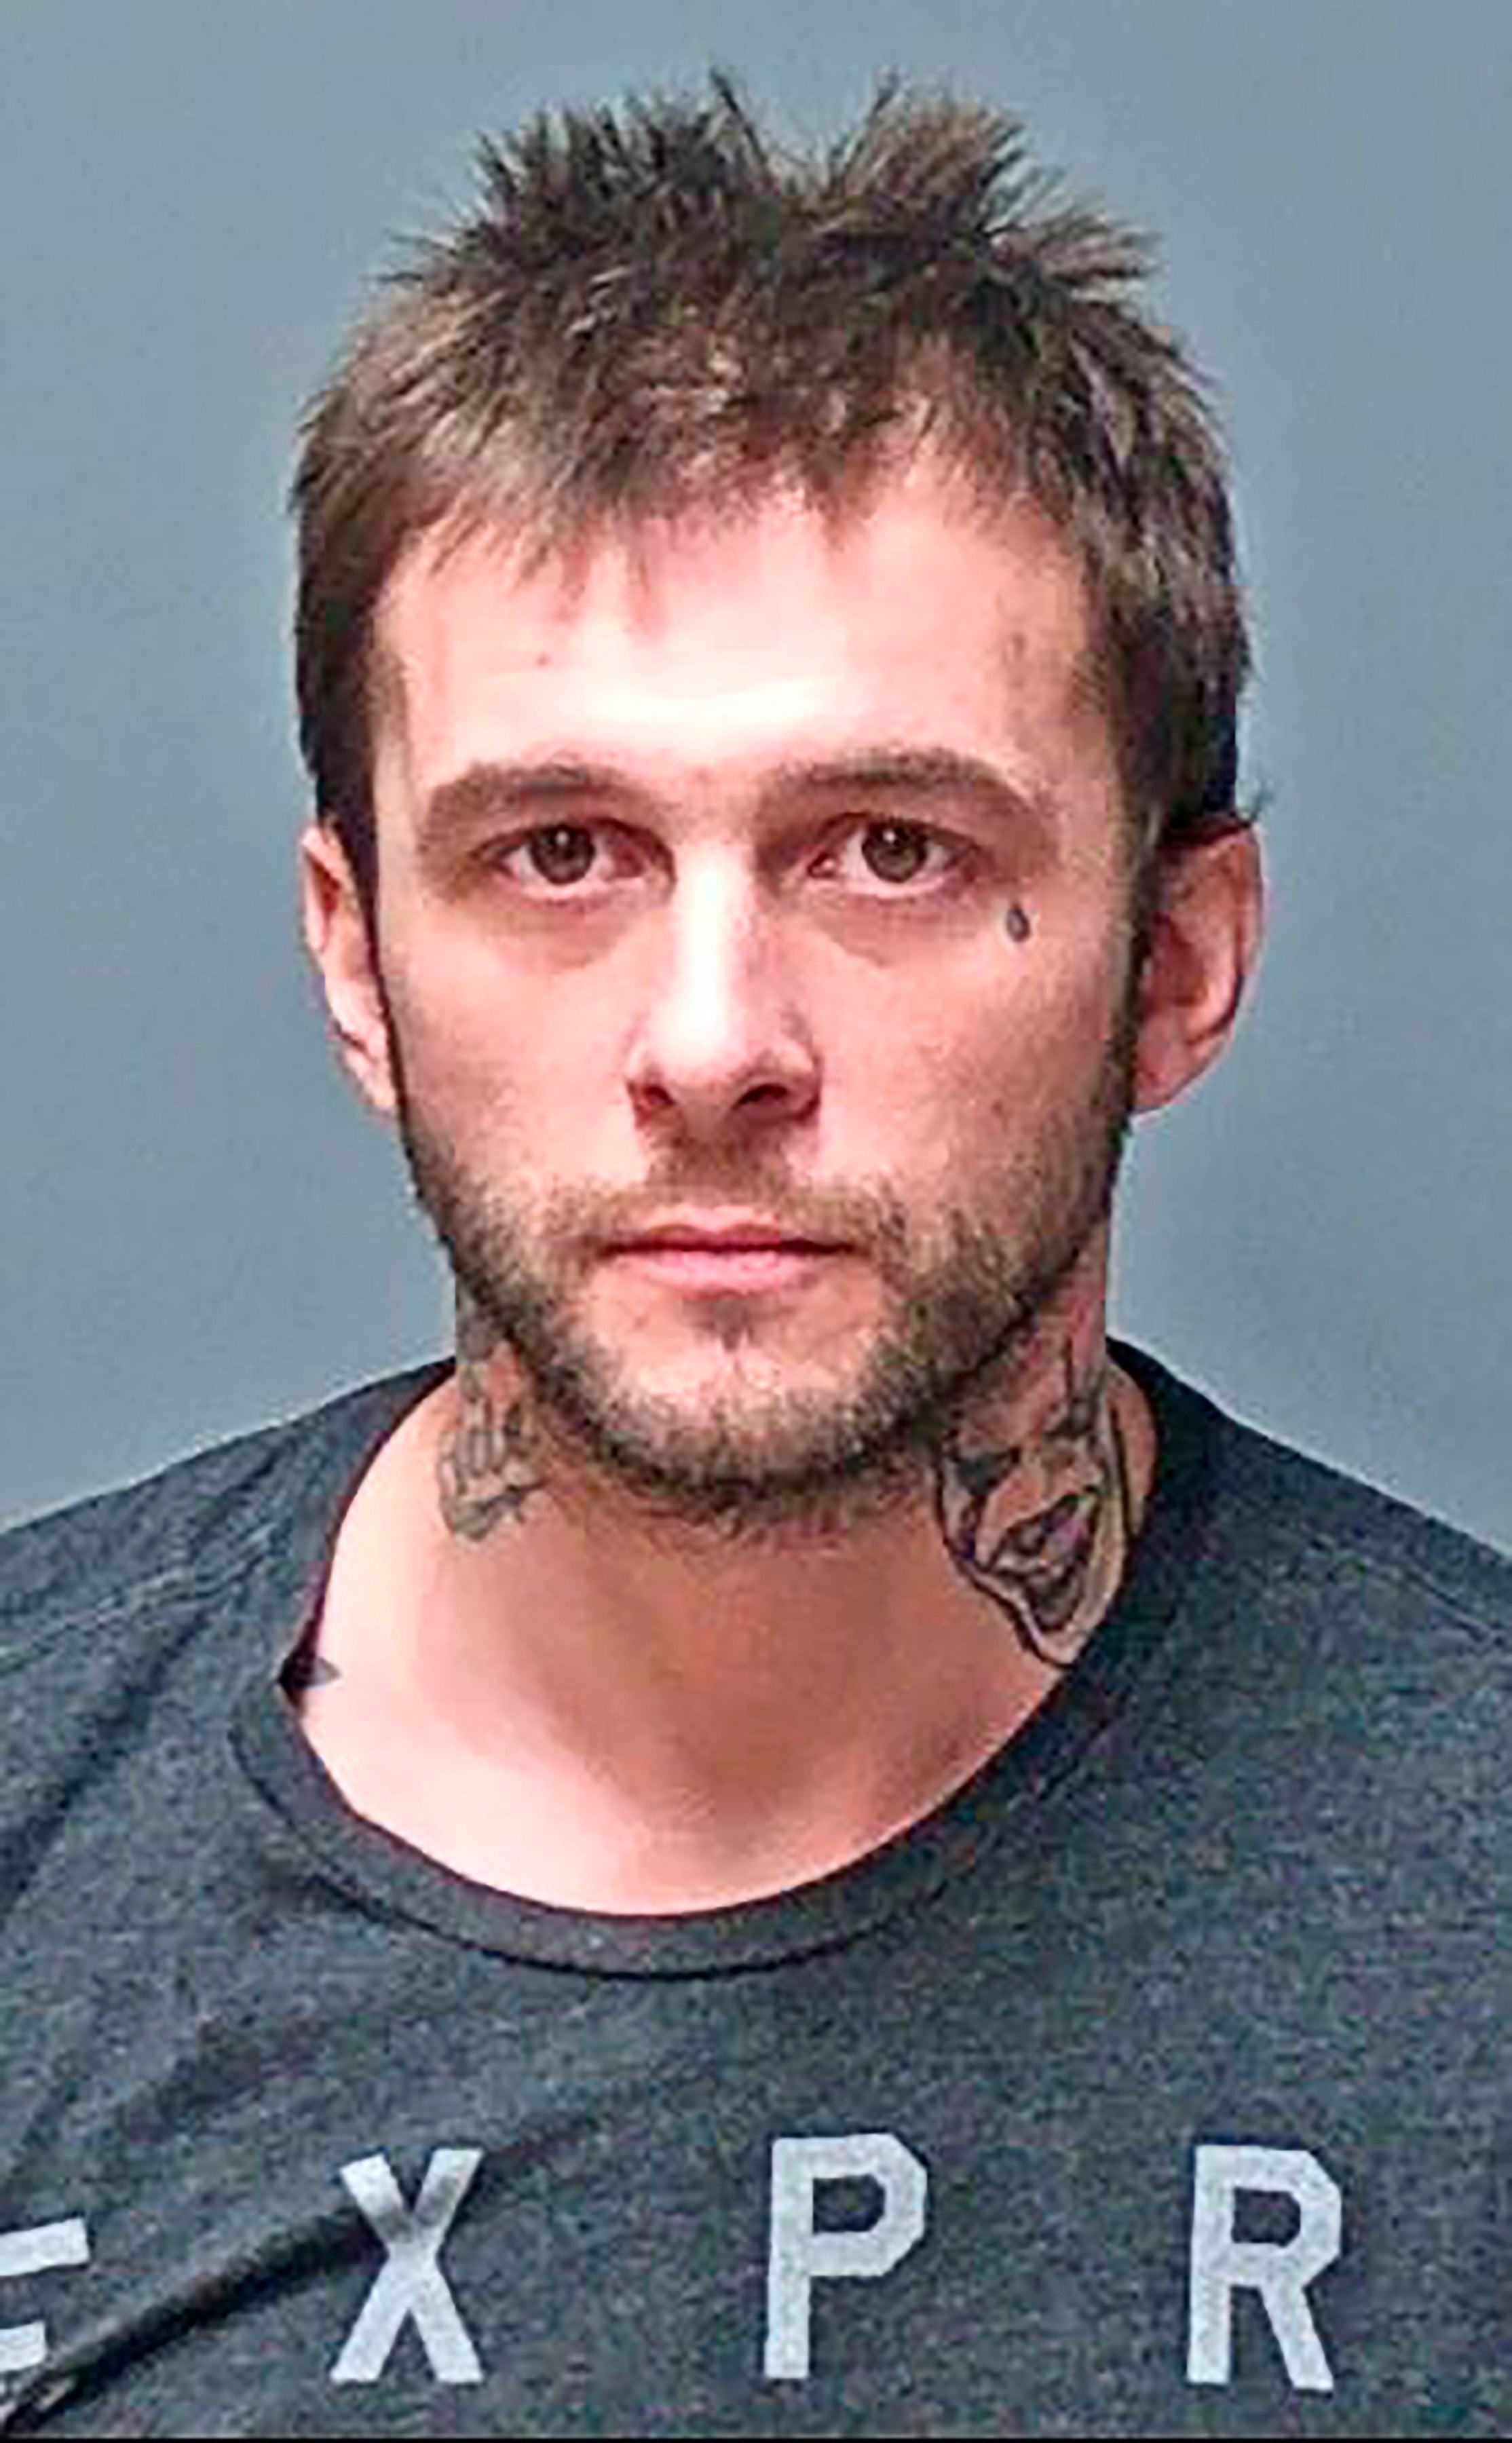 Adam Montgomery is pictured in booking photo following arrest